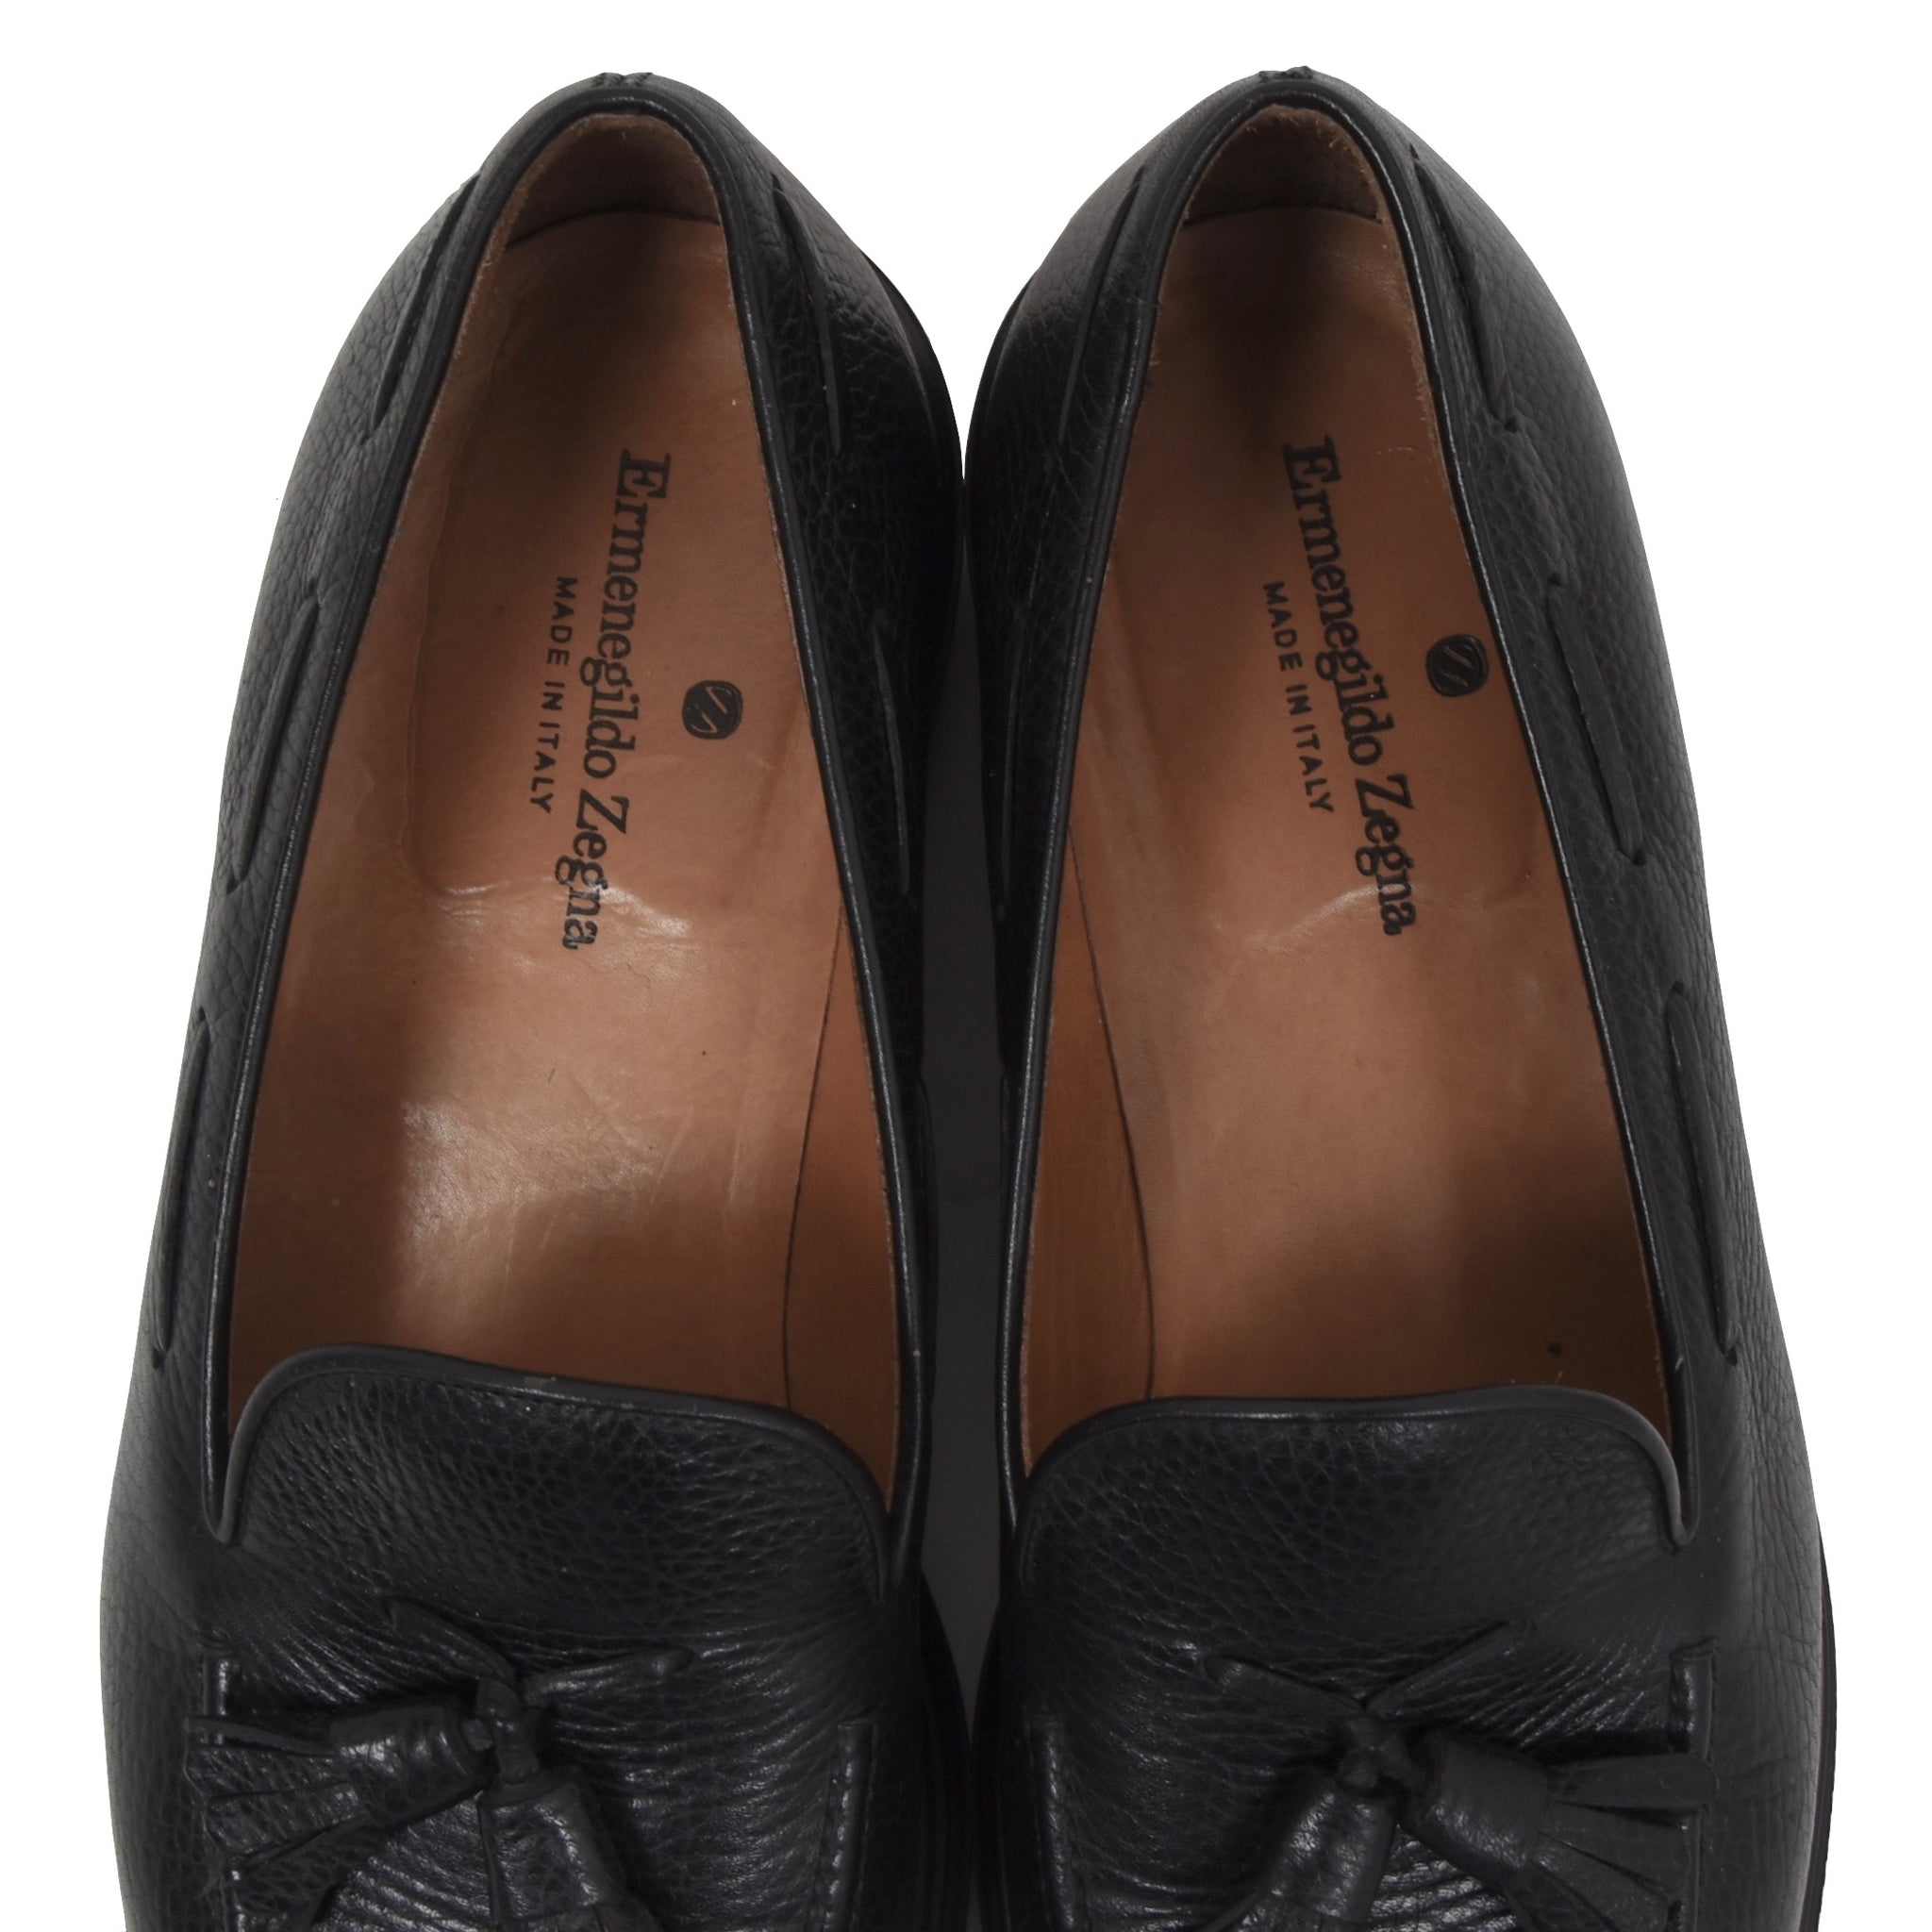 black loafers size 4